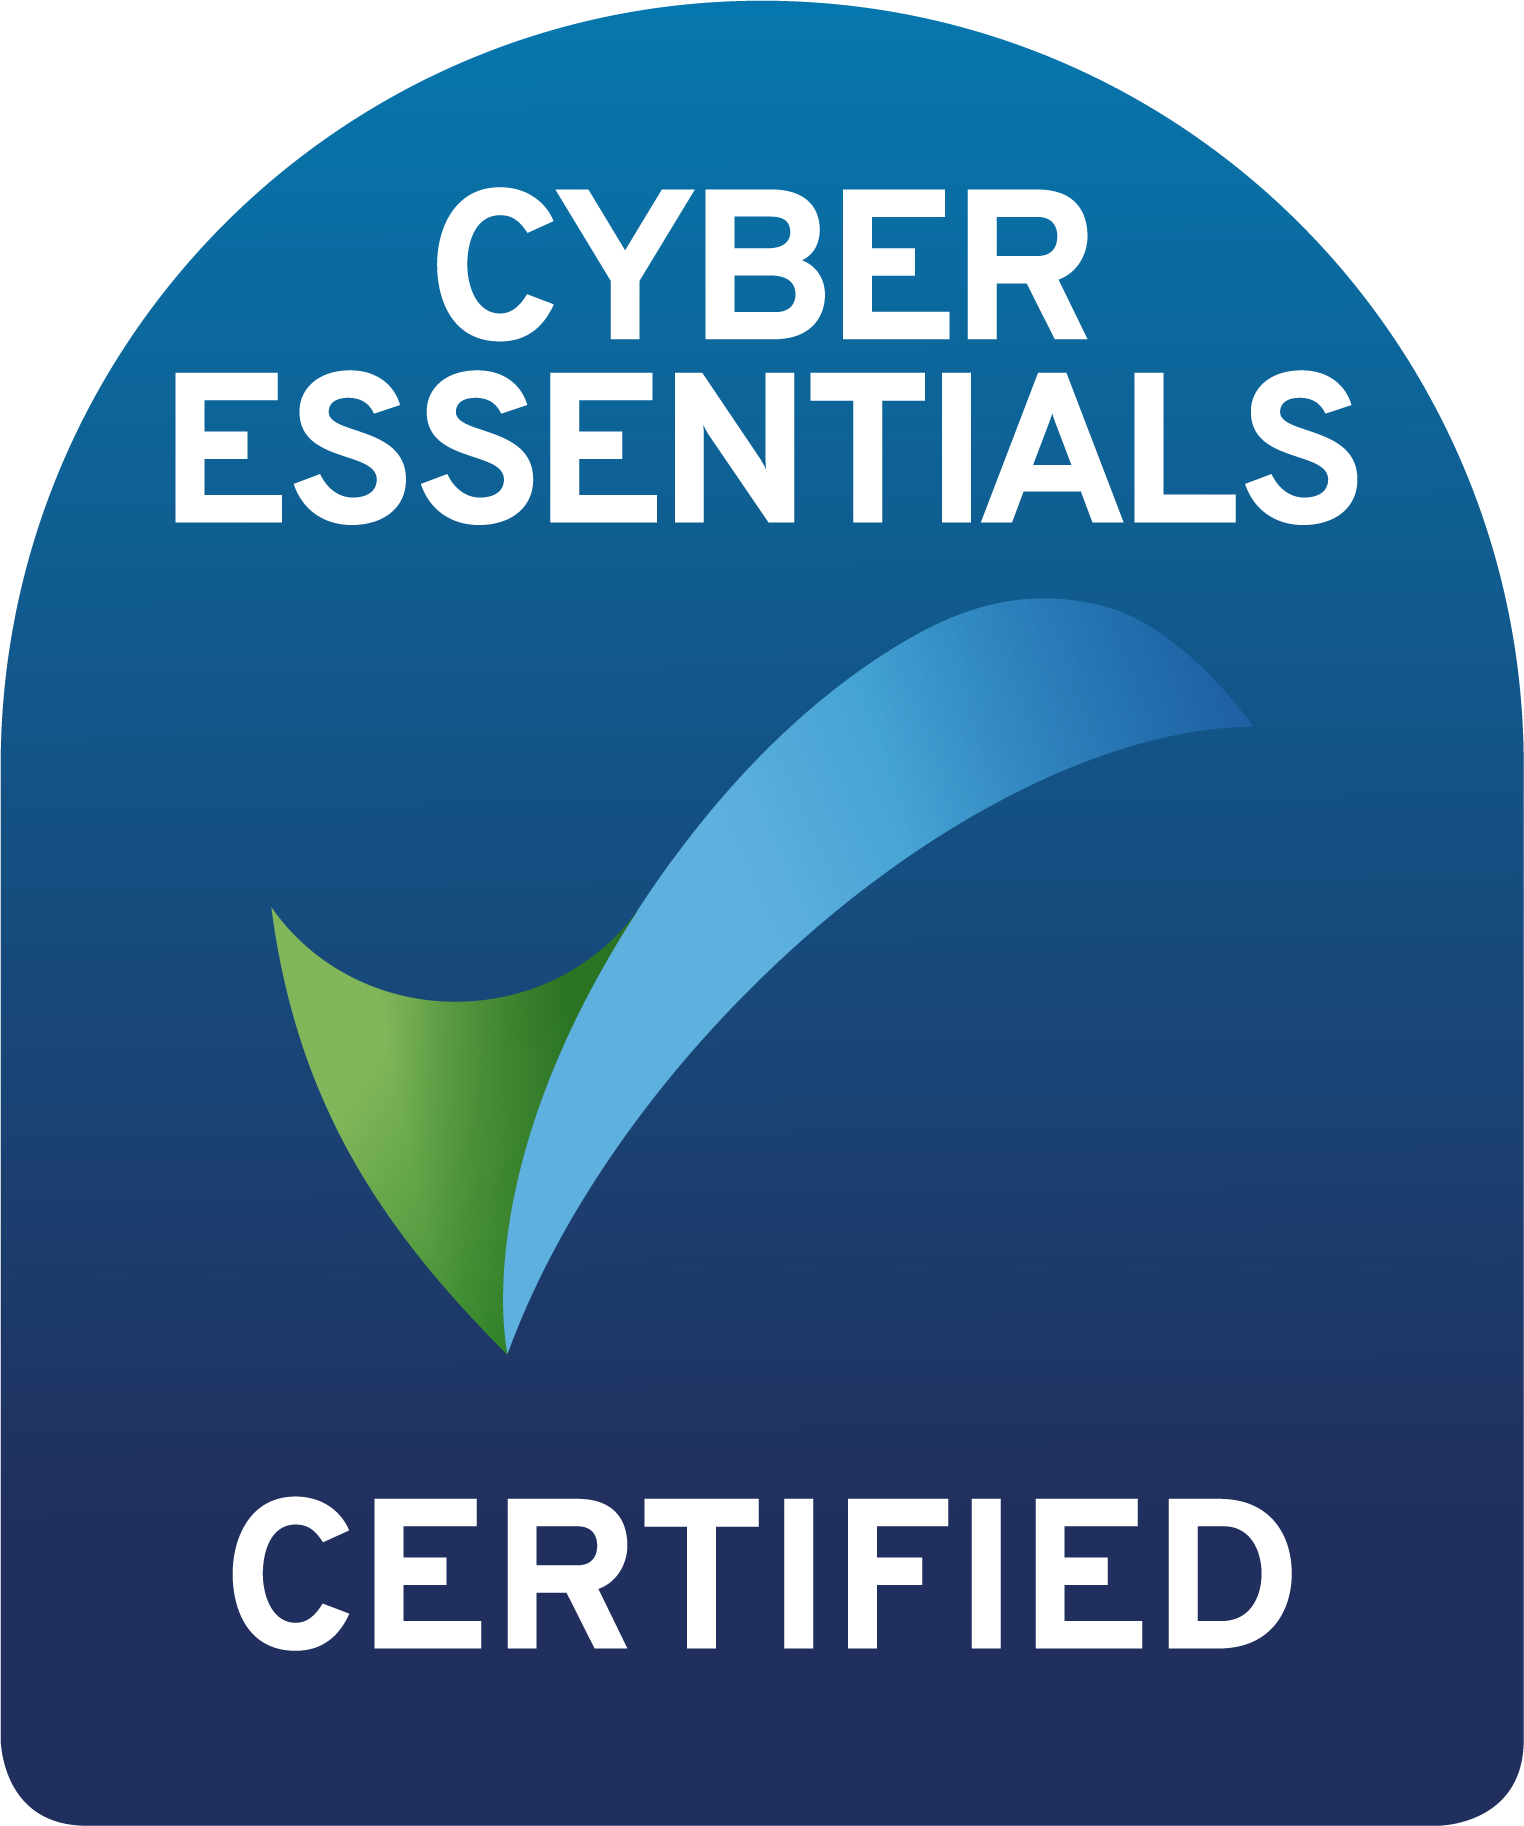 Digital Transit becomes Cyber Essentials Certified